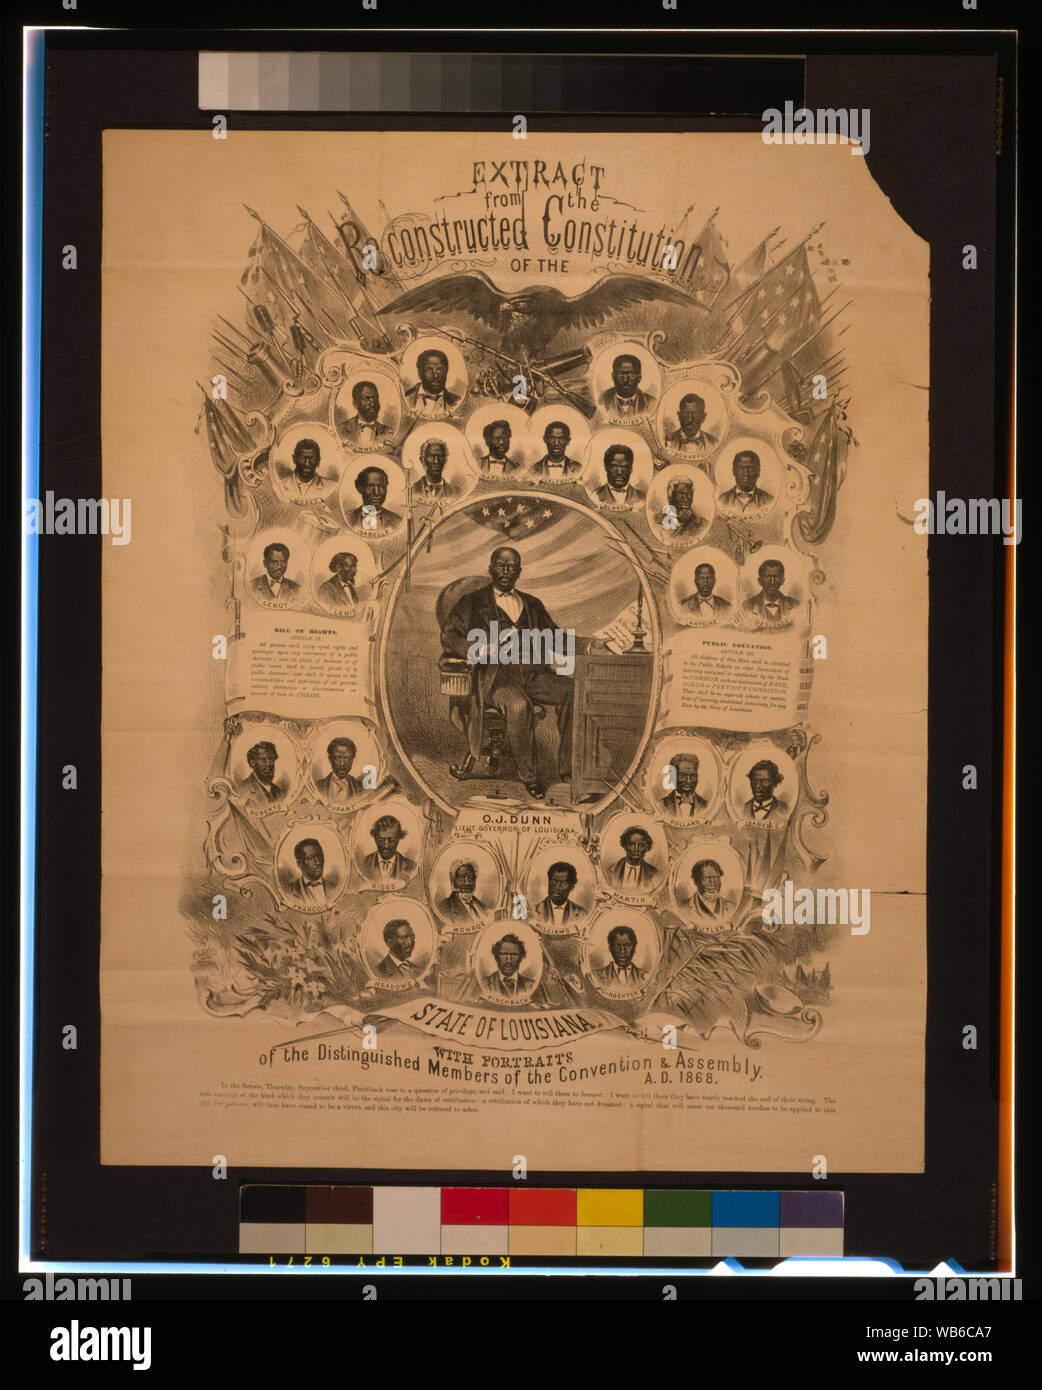 Extract from the reconstructed Constitution of the state of Louisiana, with portraits of the distinguished members of the Convention & Assembly, A.D. 1868 Abstract/medium: 1 print : lithograph. Stock Photo